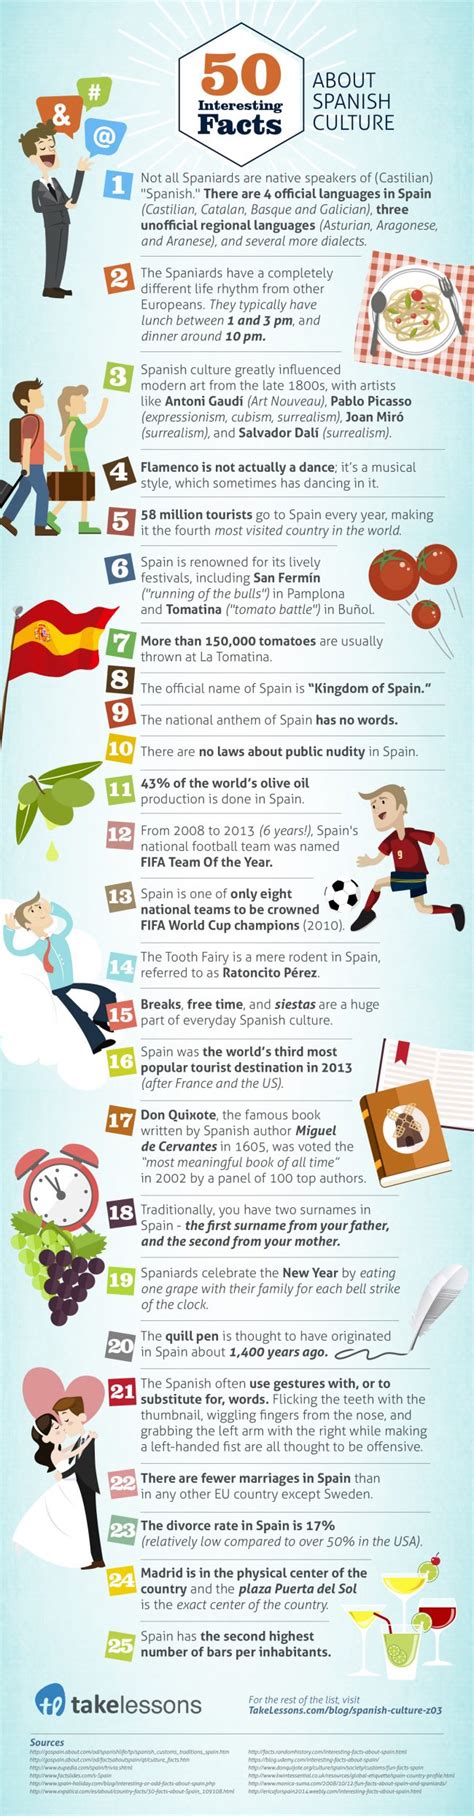 25 Interesting Facts About Spanish Culture Infographic Acis